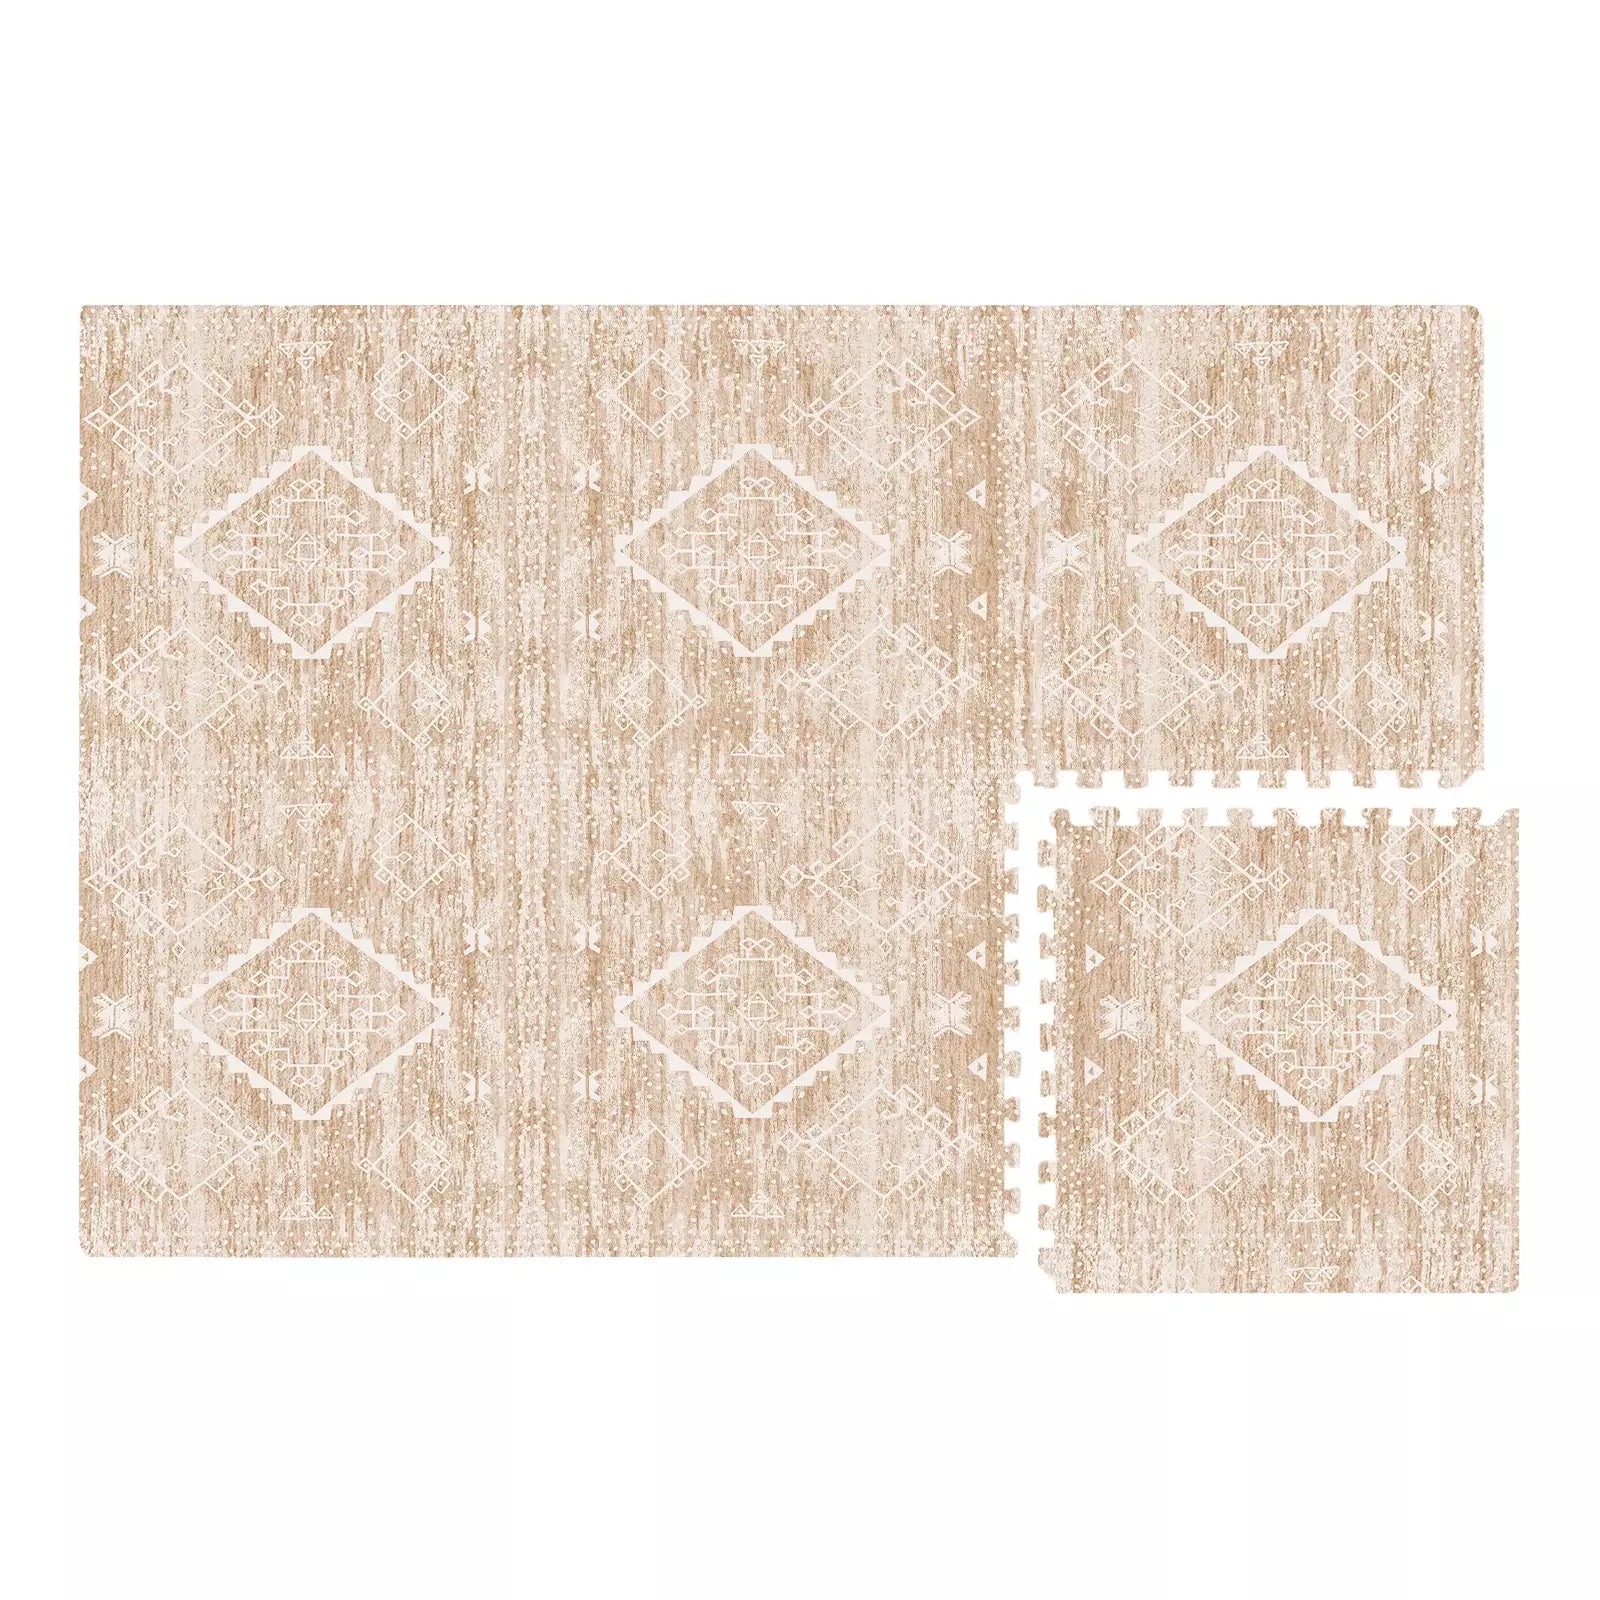 Overhead image of the Ula Amber brown minimal boho pattern play mat in size 4x6